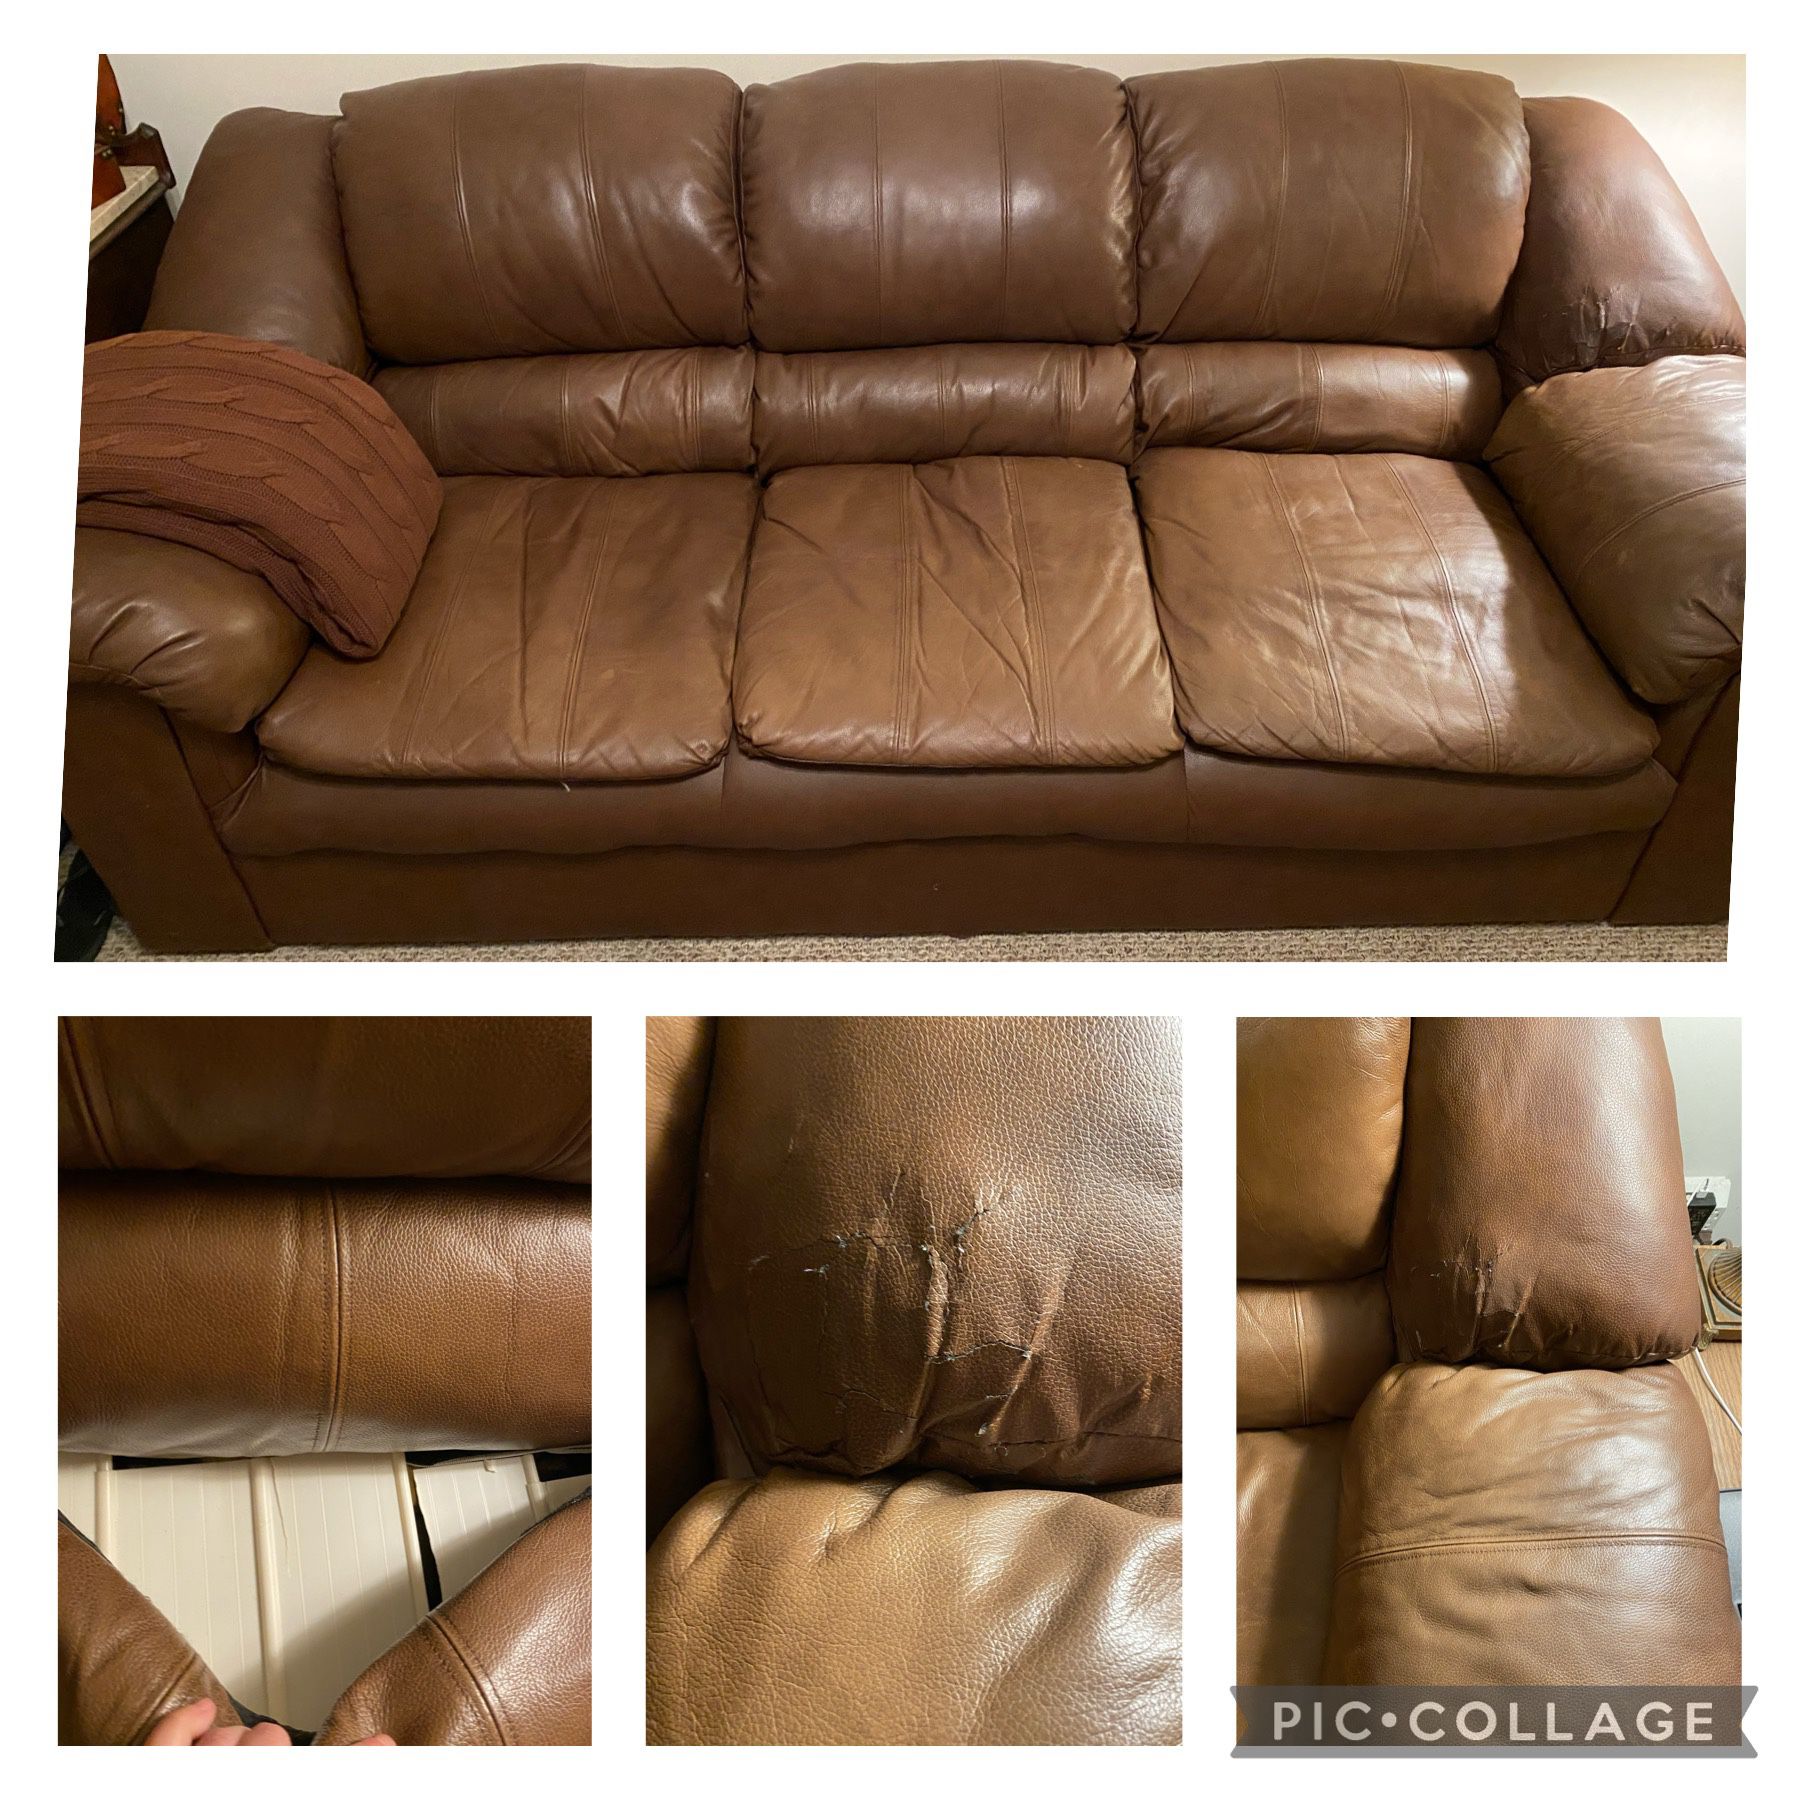 Faux Leather Sofa Come Get Today. 8/28